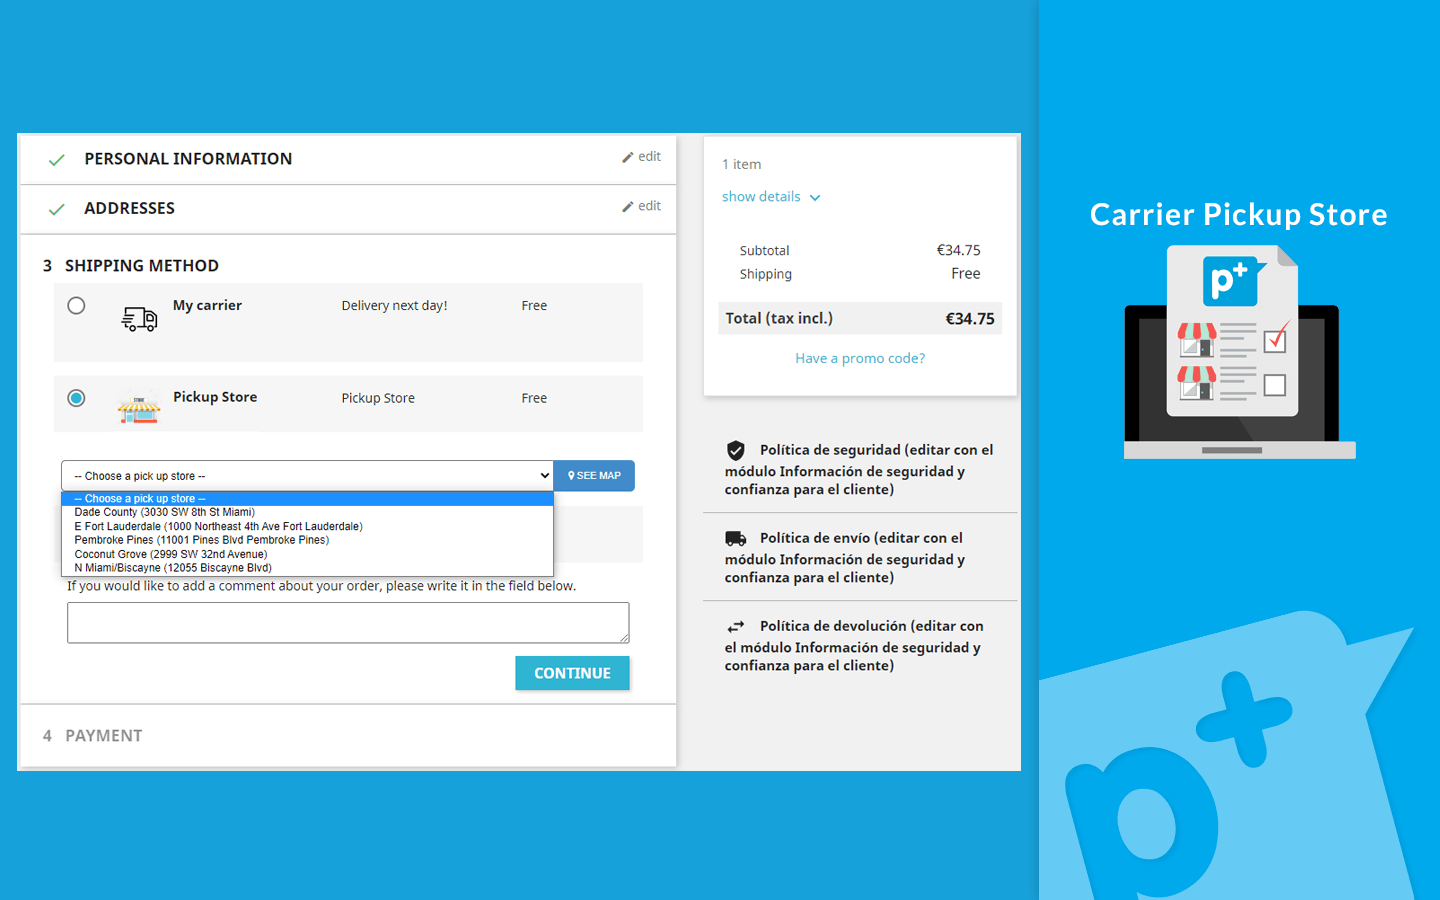 Carrier Pickup Store - List the pickup points of your physical stores